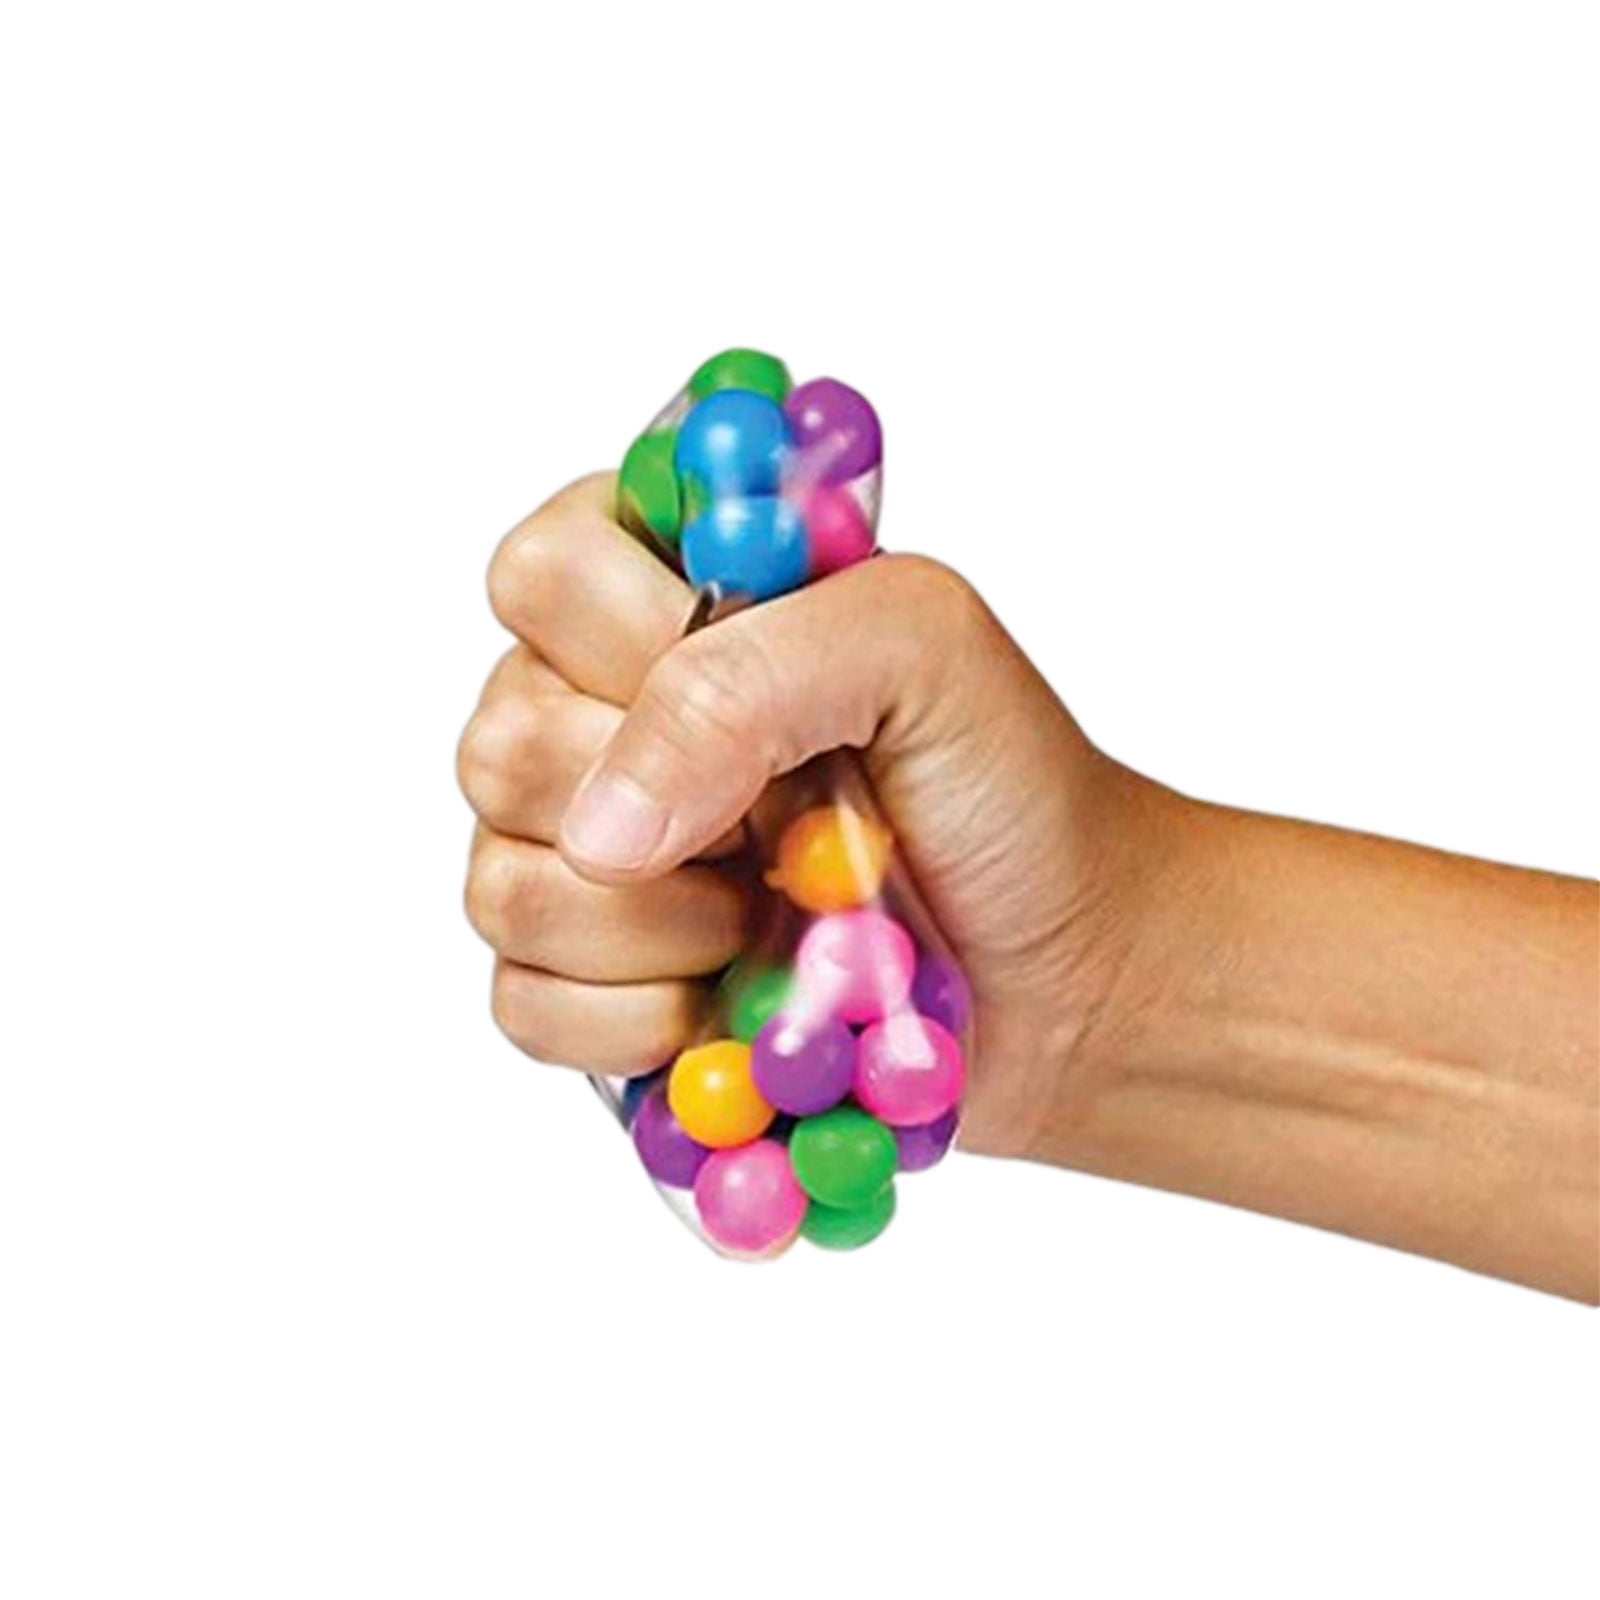 BEAD GEL SQUISHY STRESS BALL 385-717 SQUEEZE PULL SQUISH COLOURFUL KIDS FUN TOY 